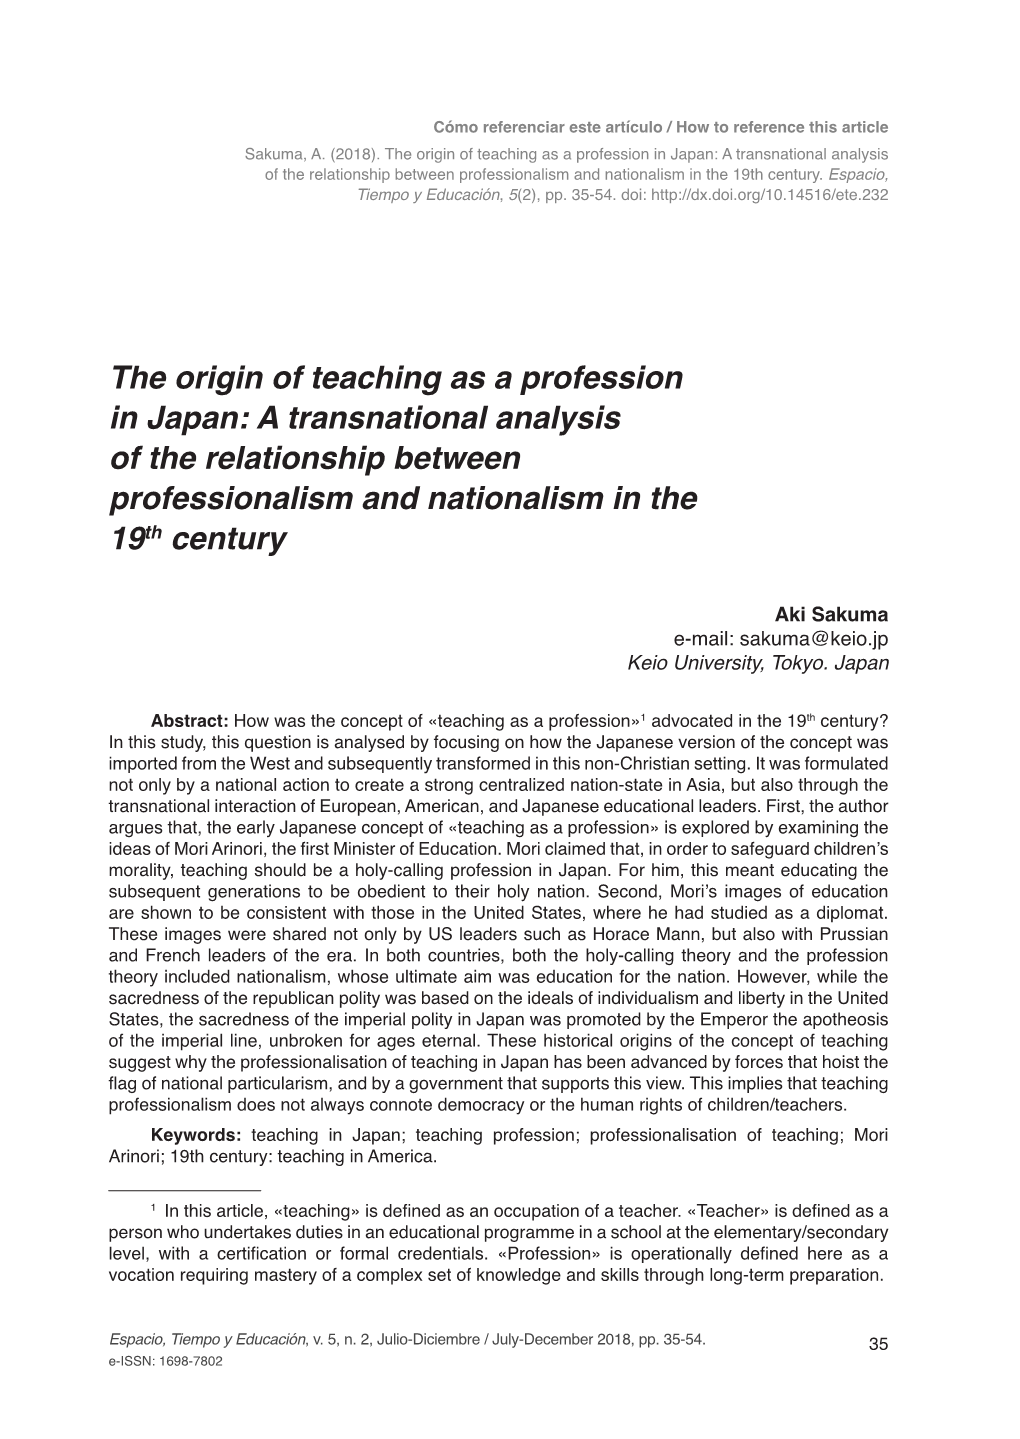 The Origin of Teaching As a Profession in Japan: a Transnational Analysis of the Relationship Between Professionalism and Nationalism in the 19Th Century